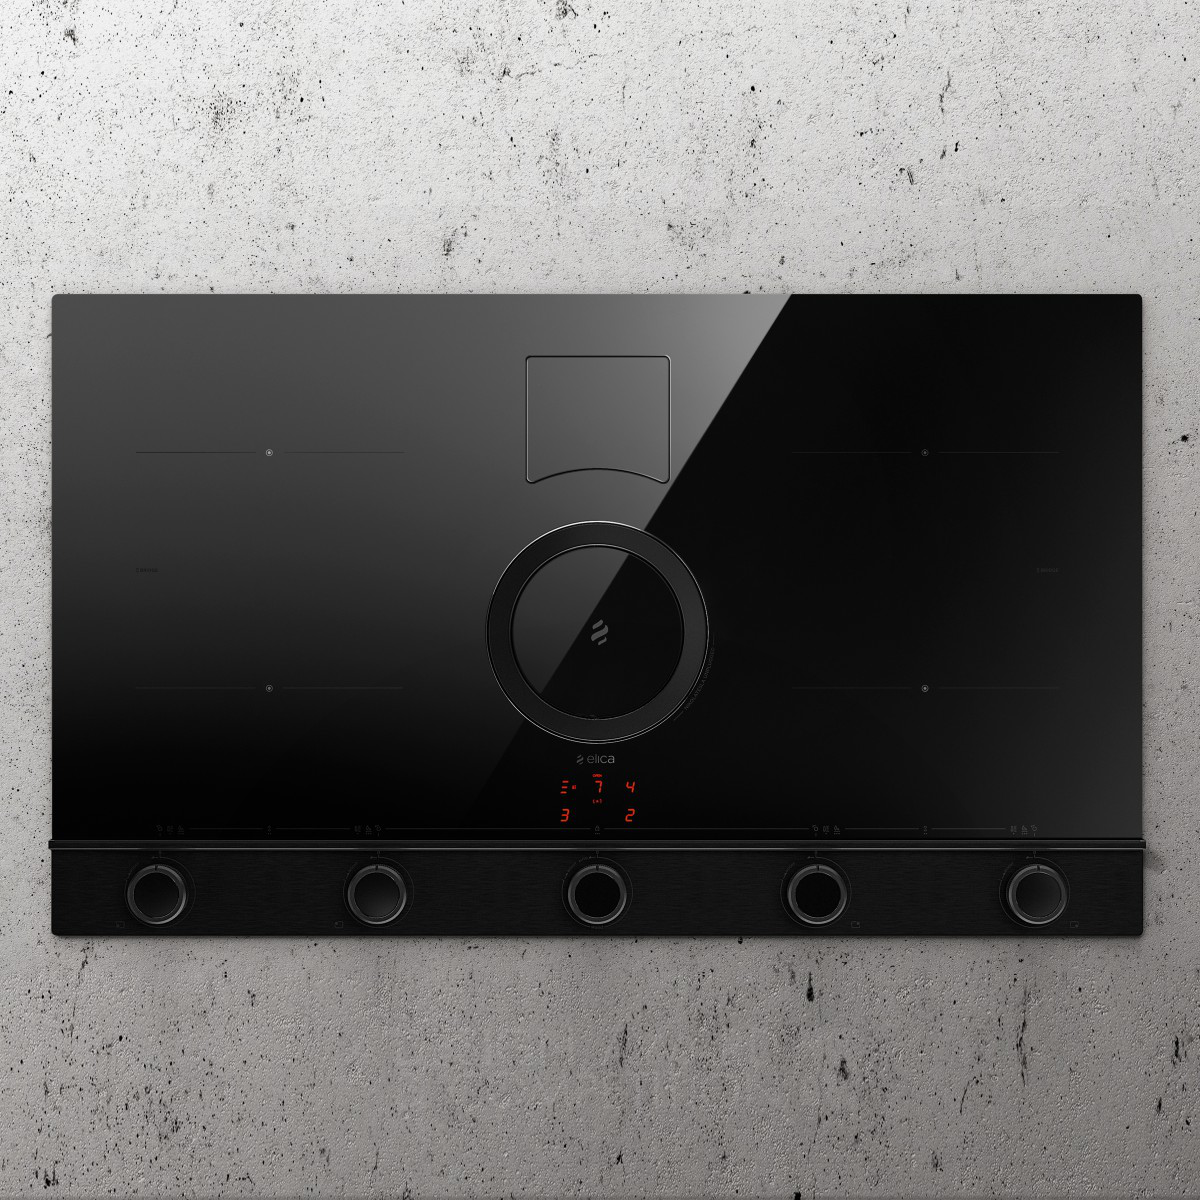 Fabrizio Crisà wins Platinum at the prestigious A' Home Appliances Design Award with Nikolatesla Unplugged Extractor Induction Hob With Knobs.